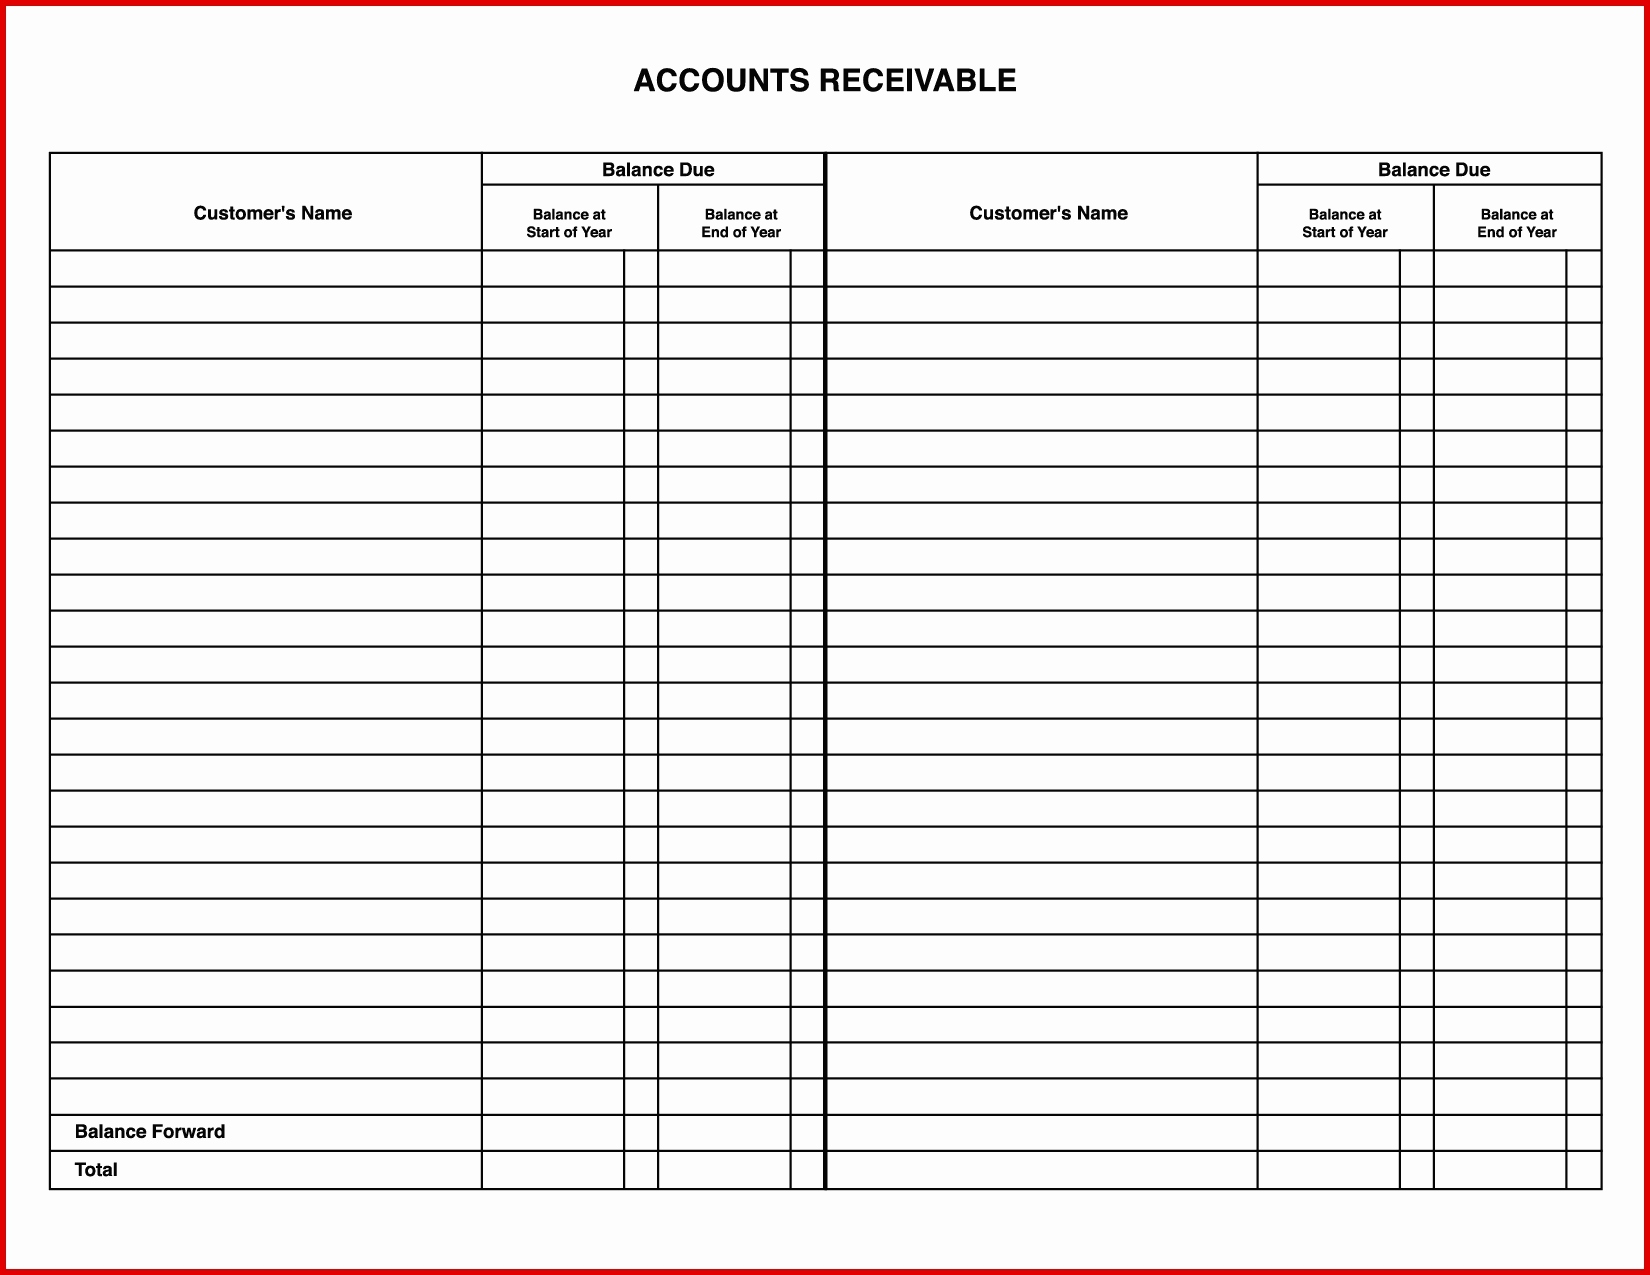 Accounts Payable Template charlotte clergy coalition